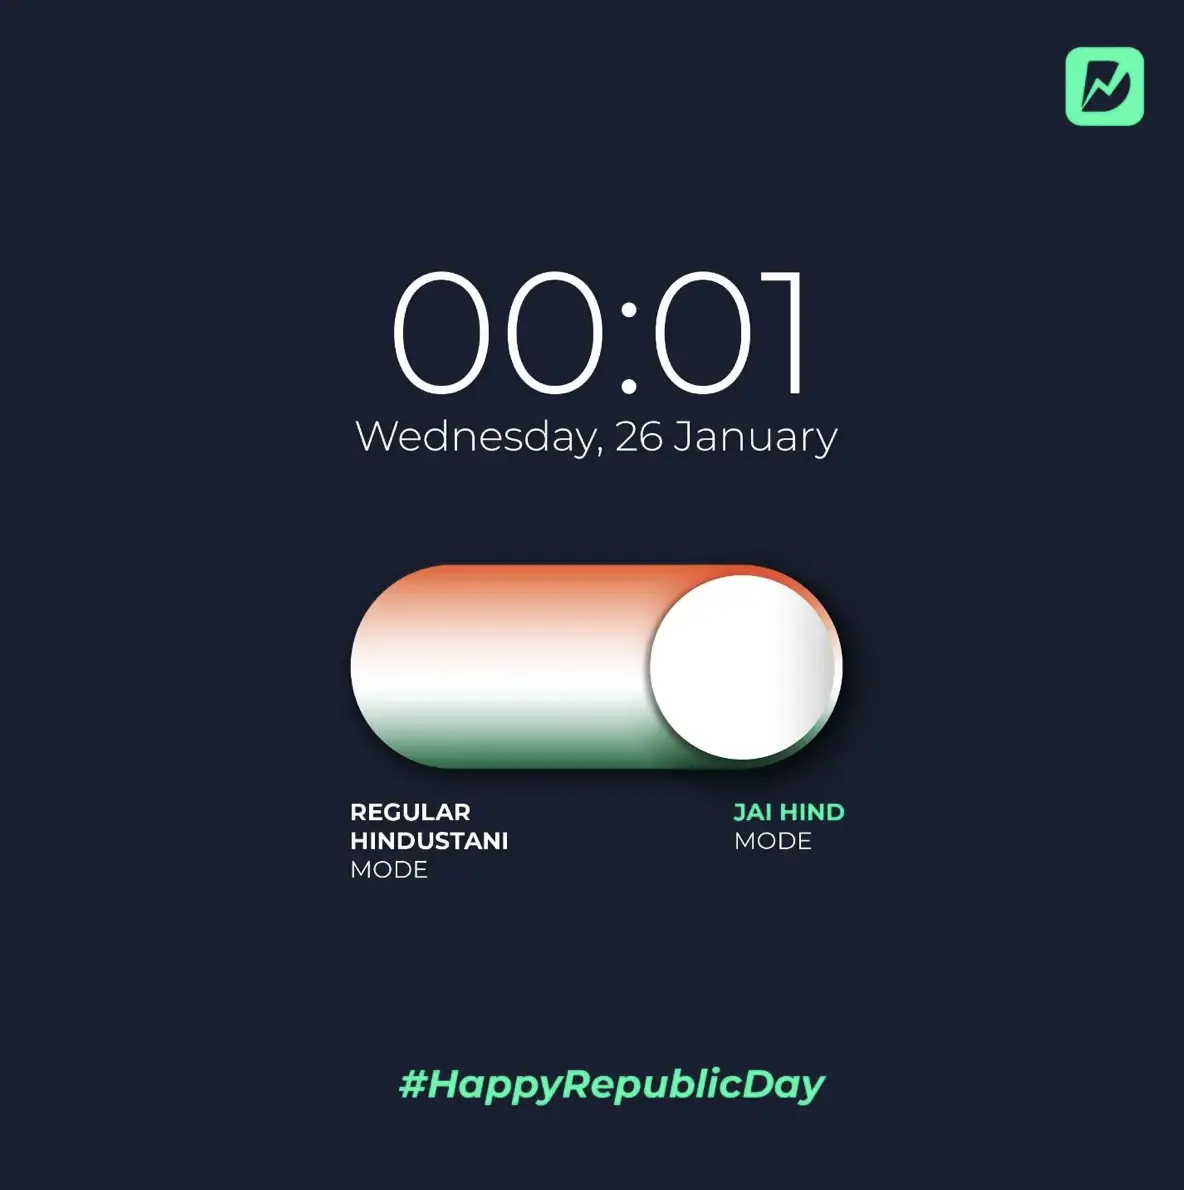 republic-day-social-media-post-ideas-from-top-brands-dunzo